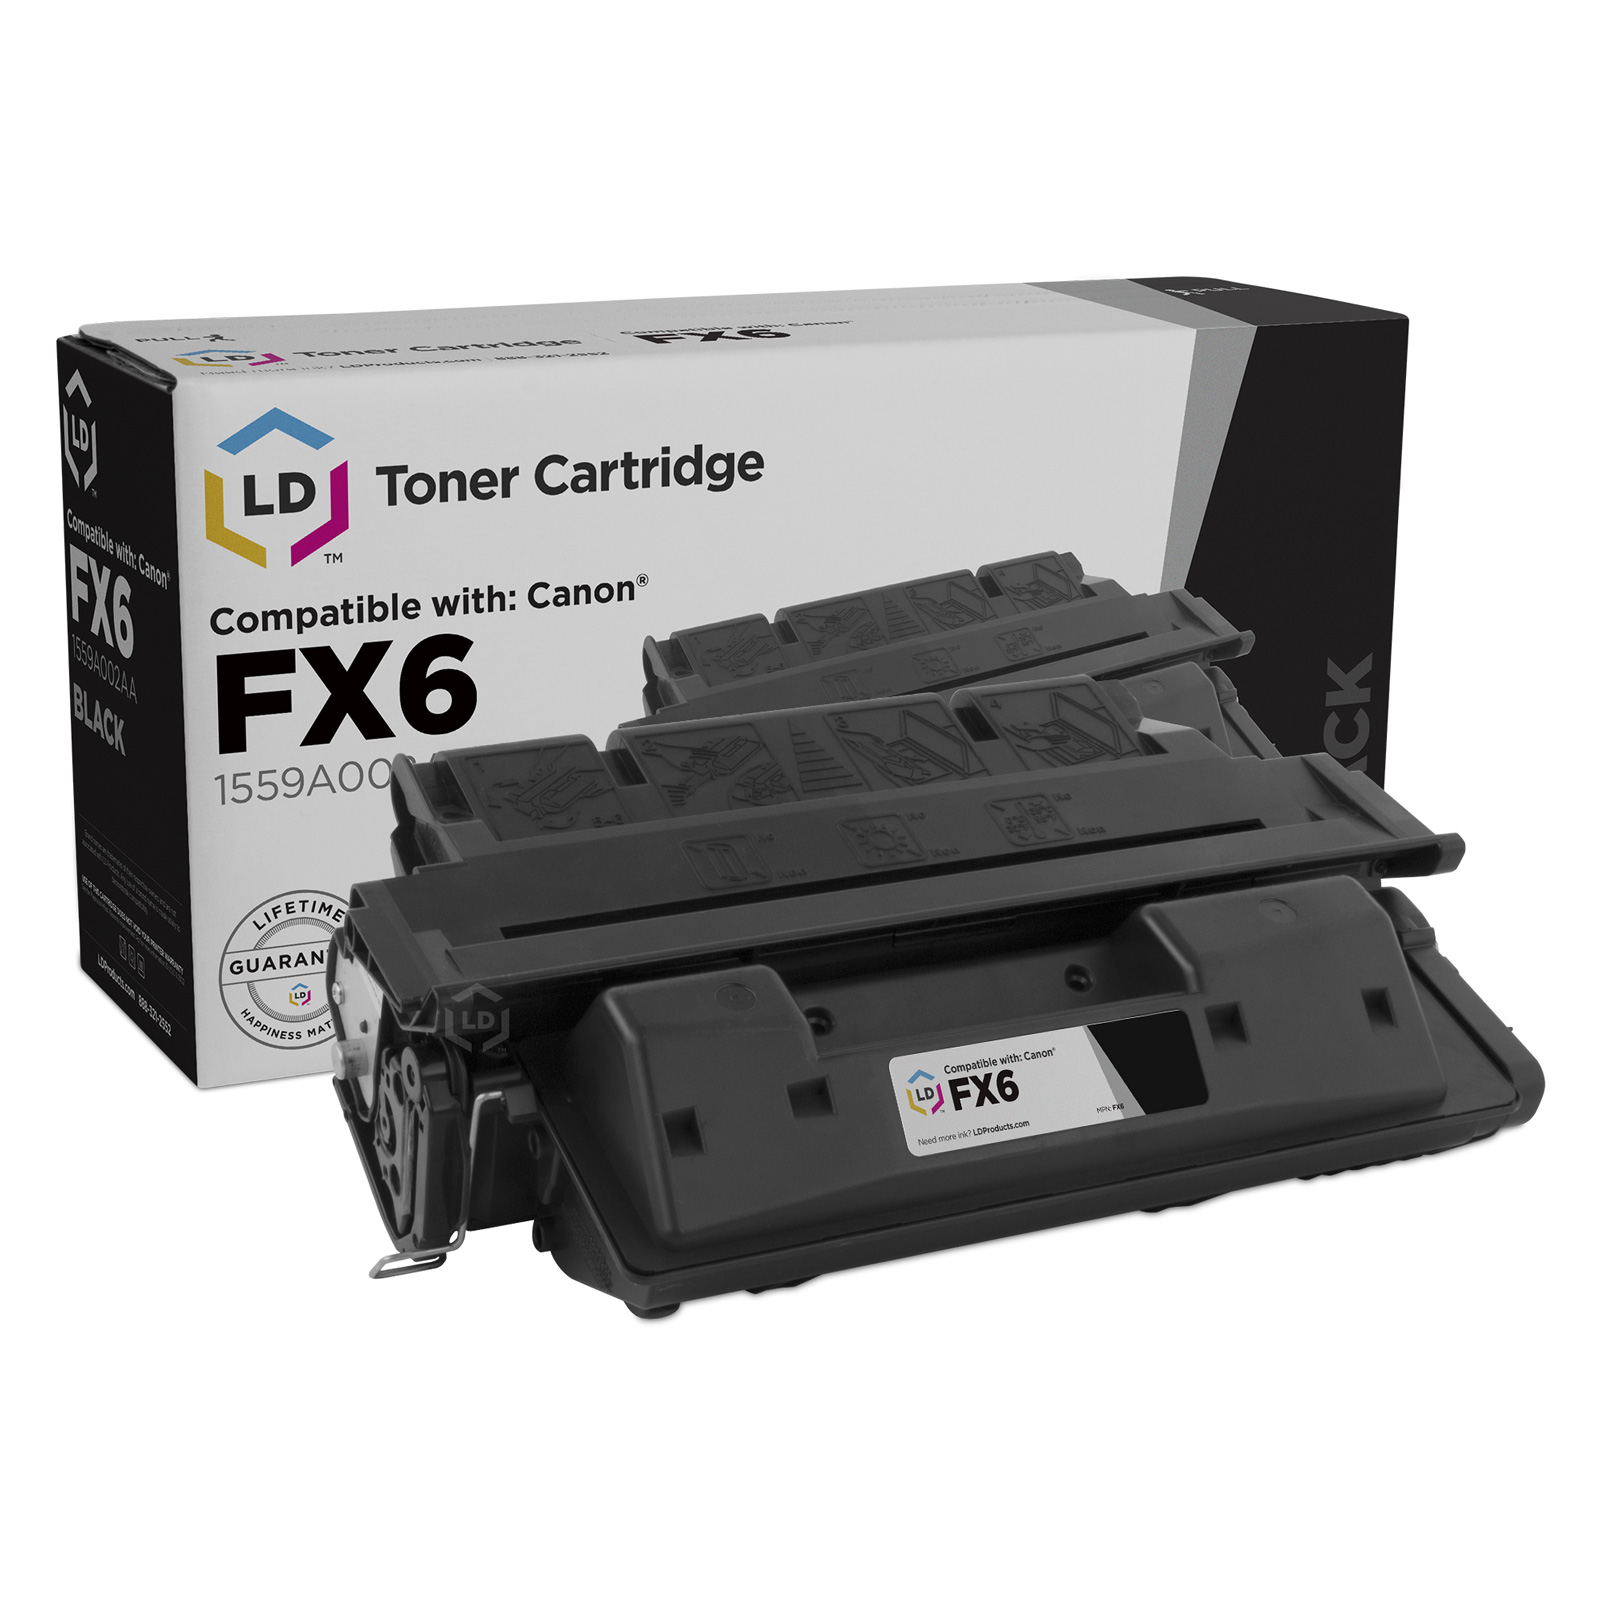 LD Products Remanufactured Toner Cartridge Replacement for Canon FX6 1559A002AA (Black) - image 1 of 6